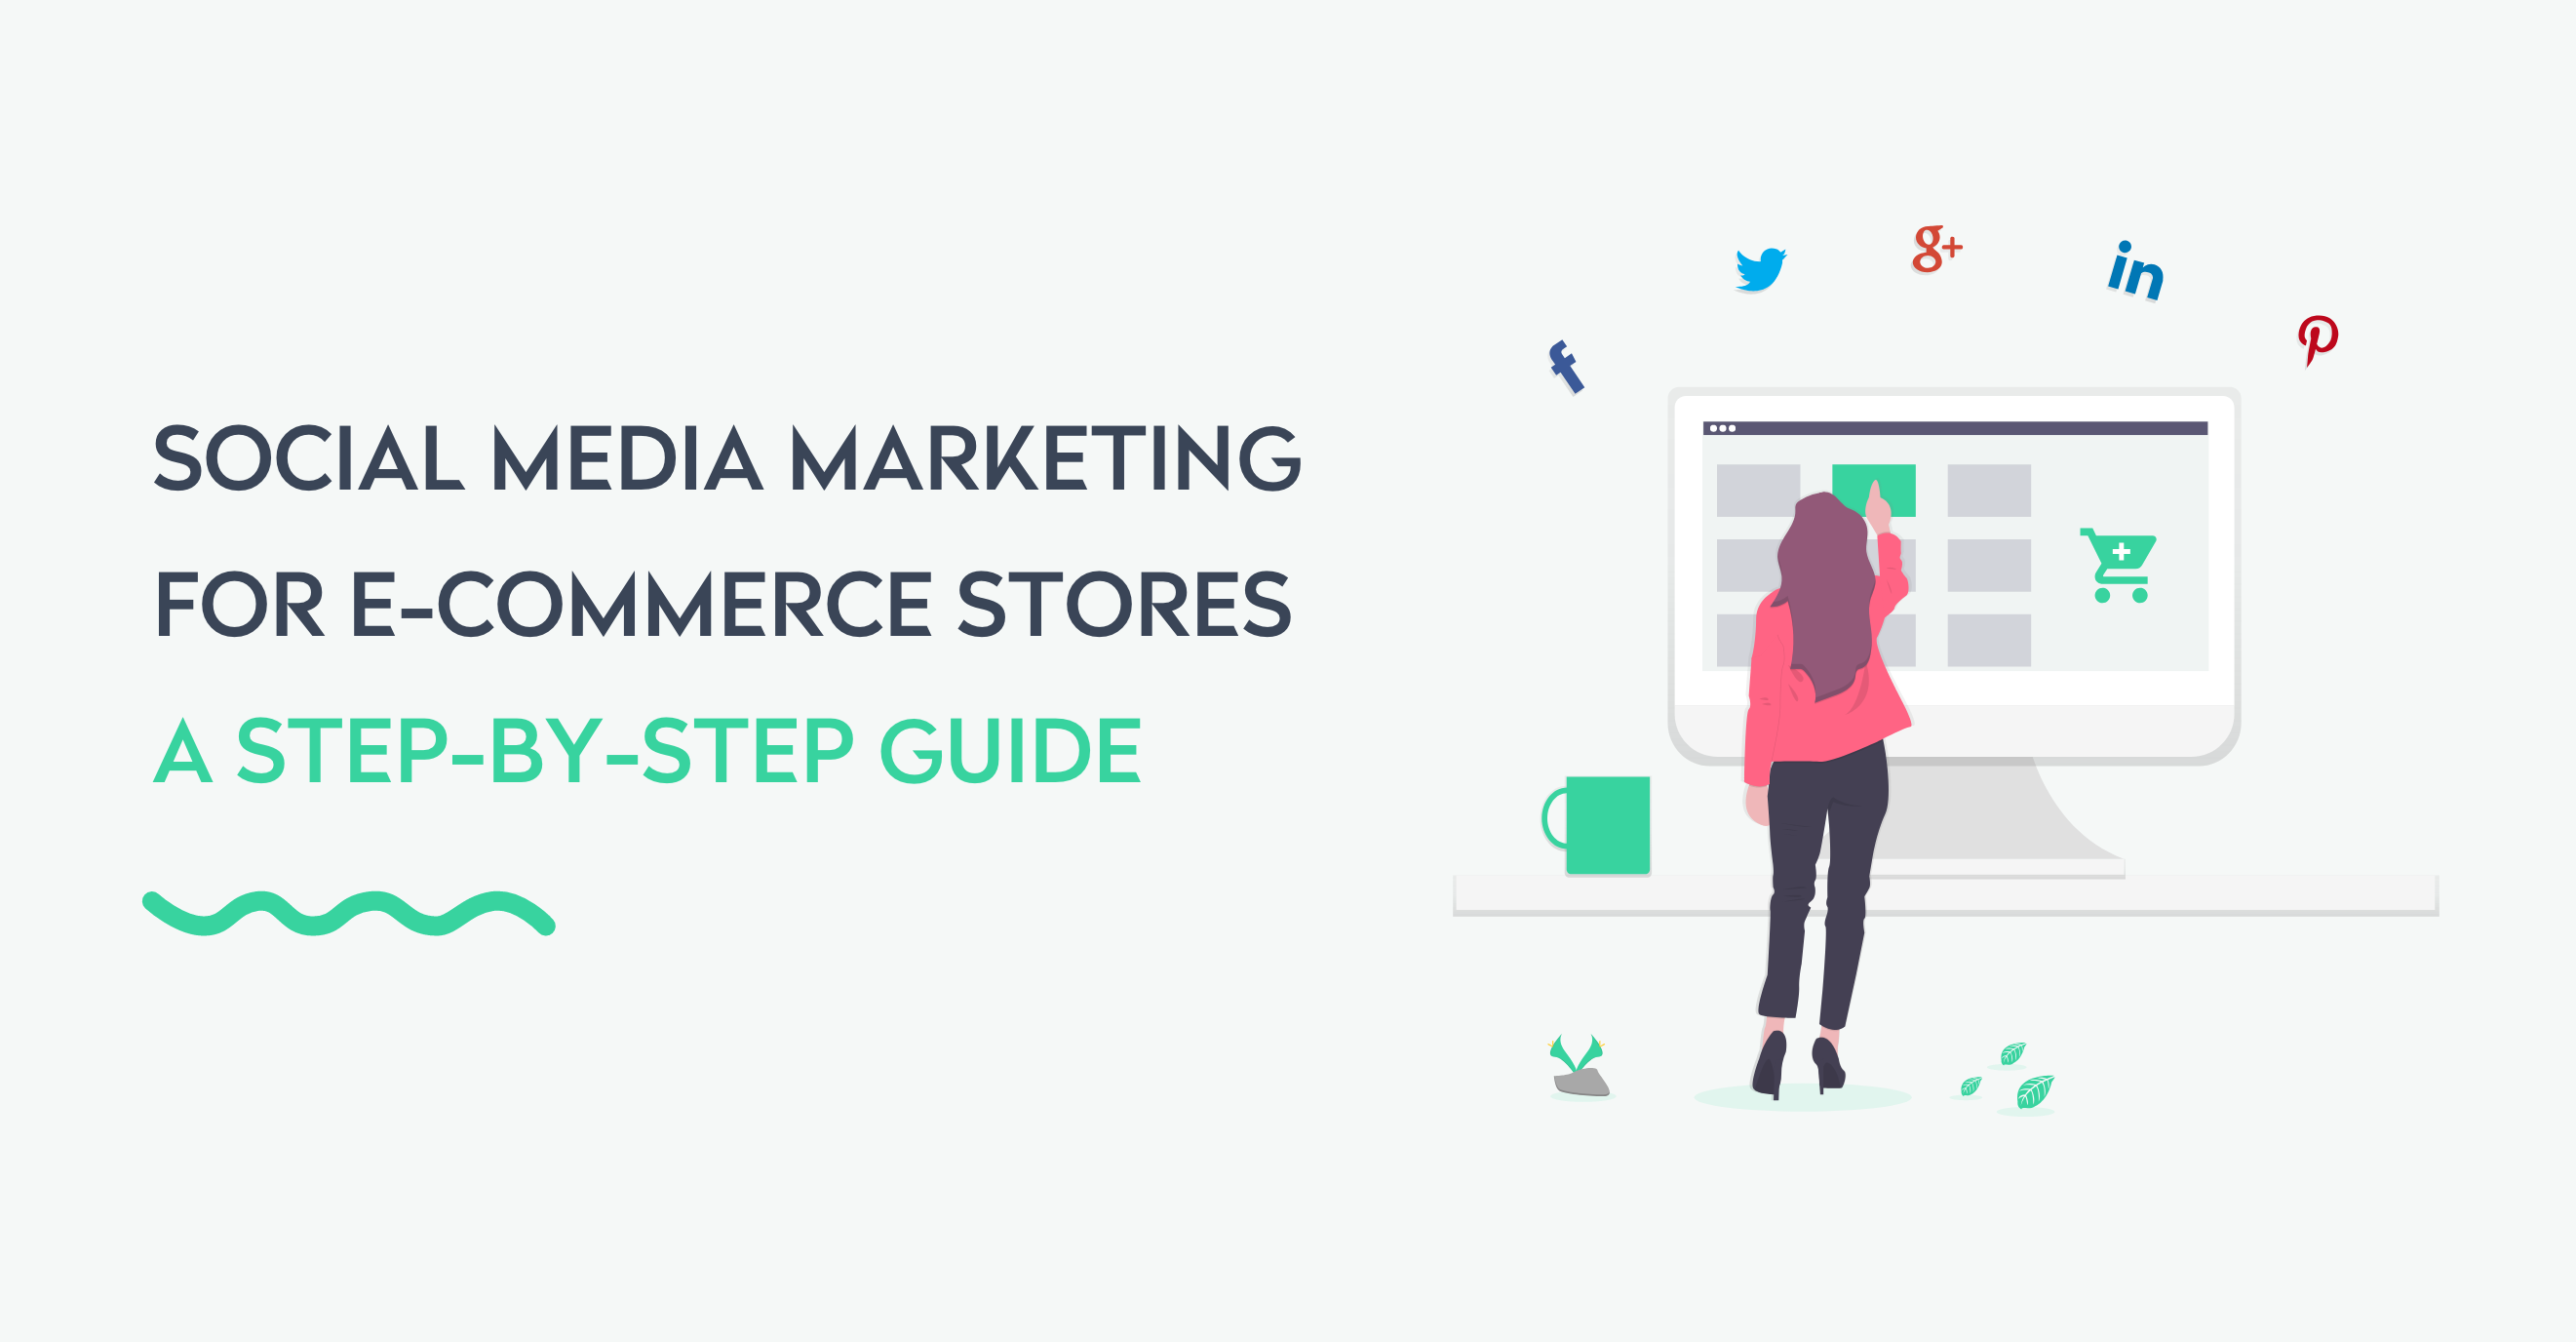 Social Media Marketing for E-commerce Stores: A Step-by-Step Guide